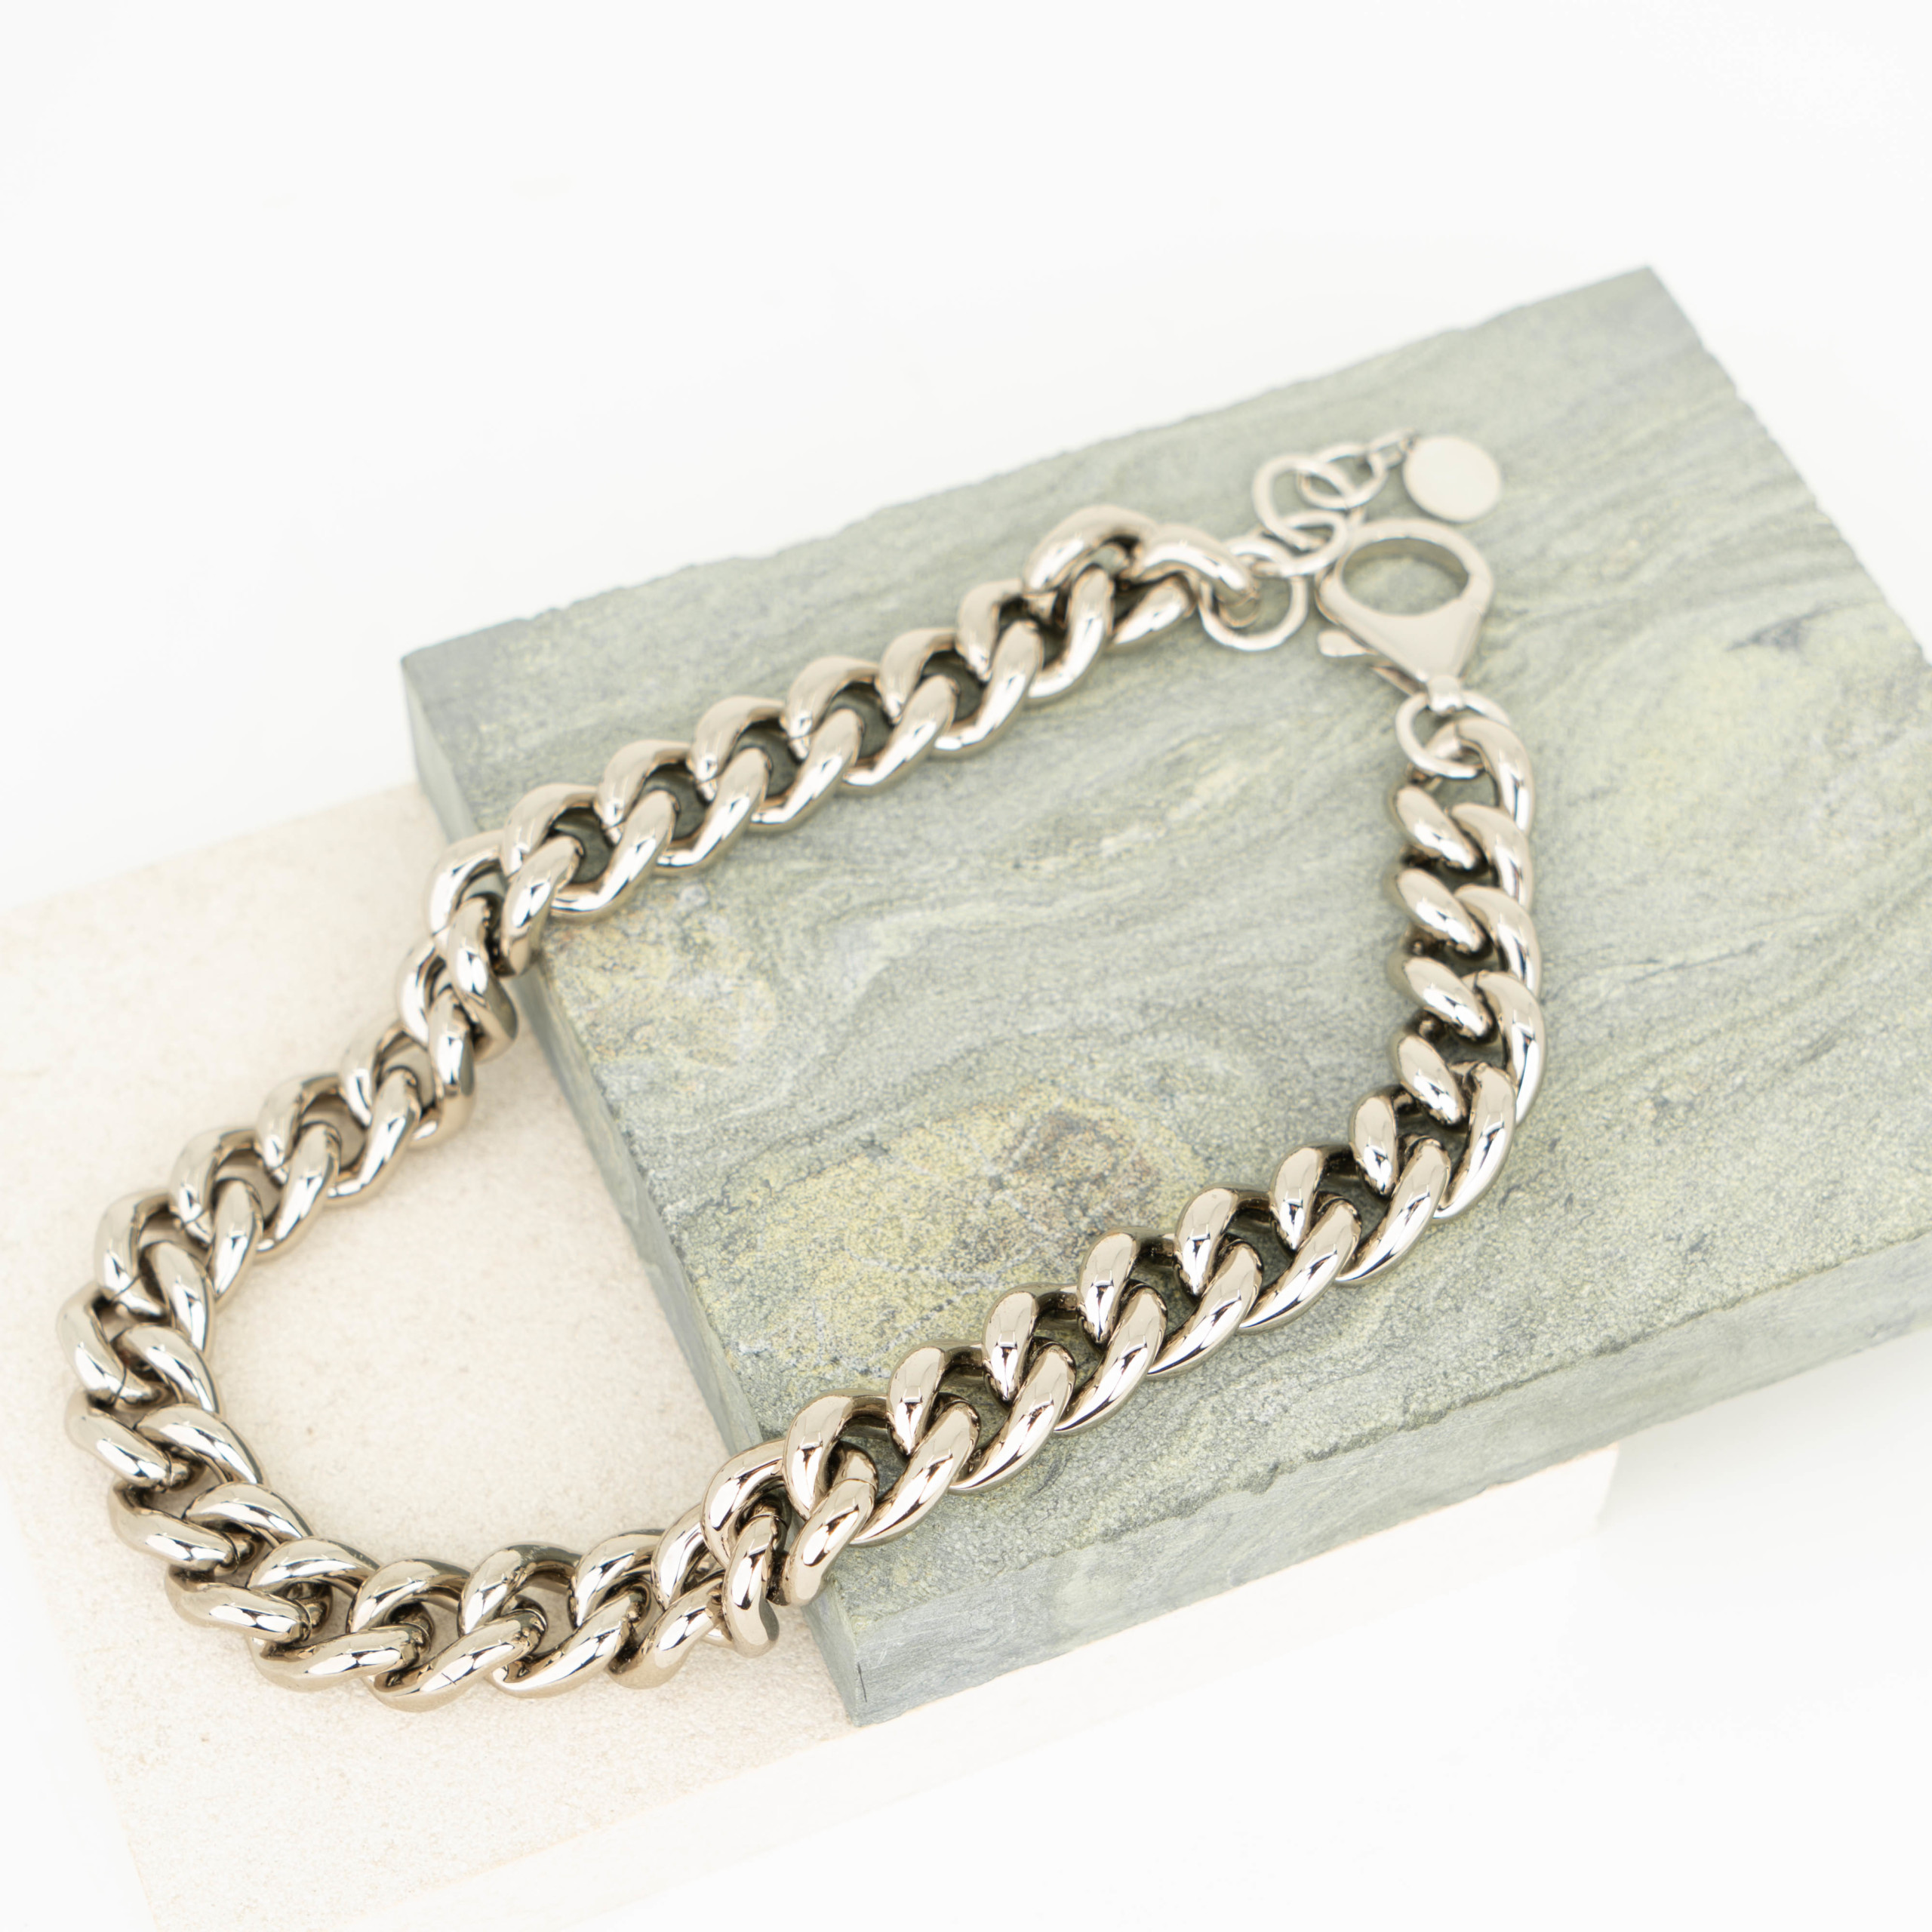 Gourmet chain silver necklace